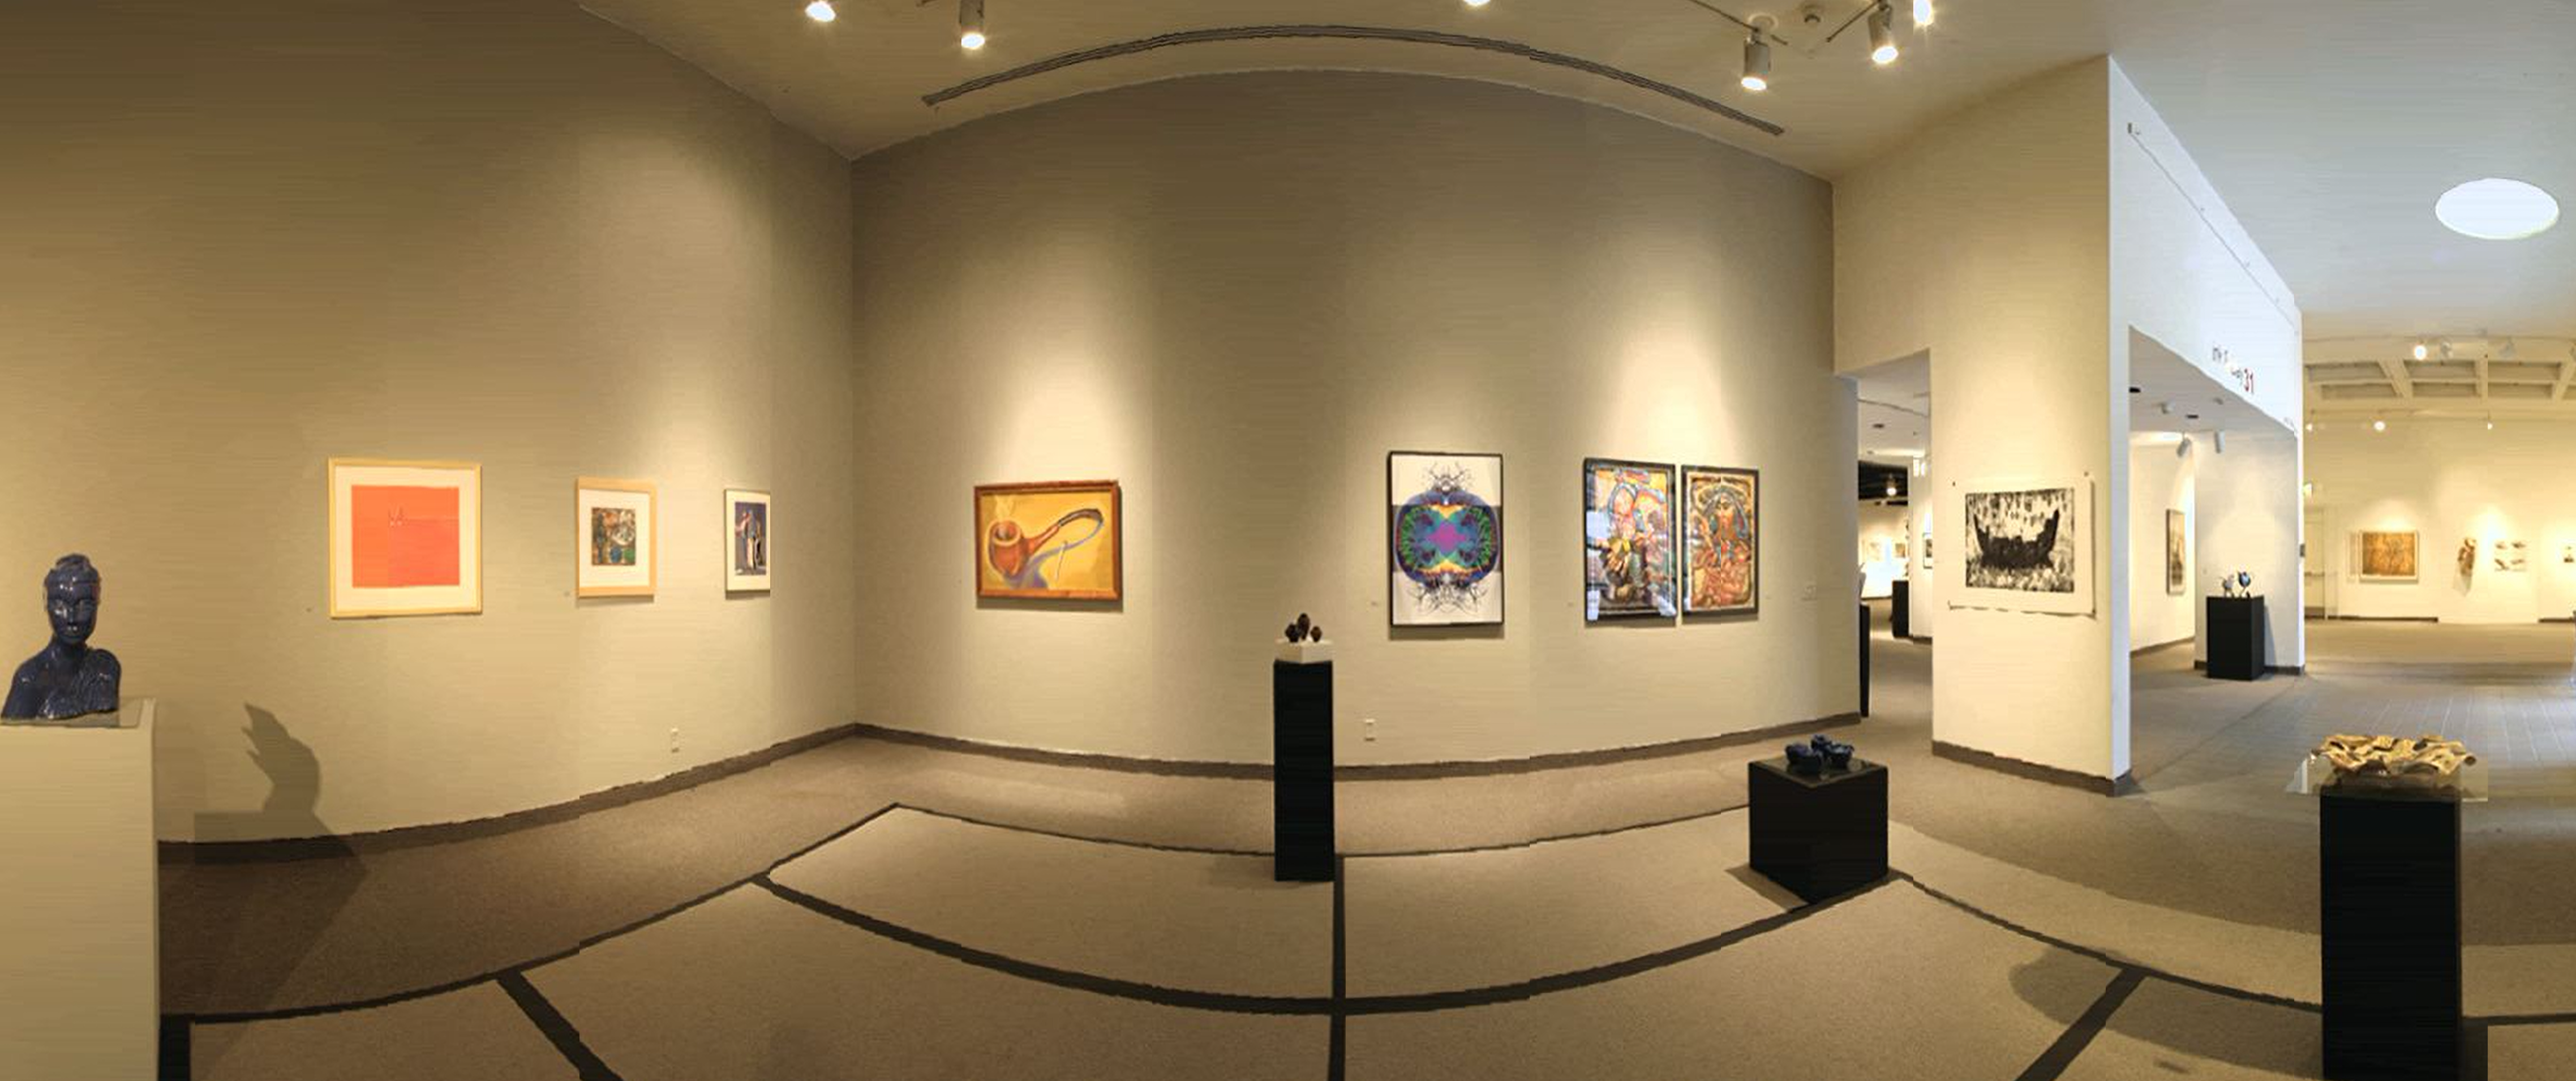 Installation View, Front East Gallery, Ink & Clay 31 Exhibition, January 07, 2005 to February 15, 2005